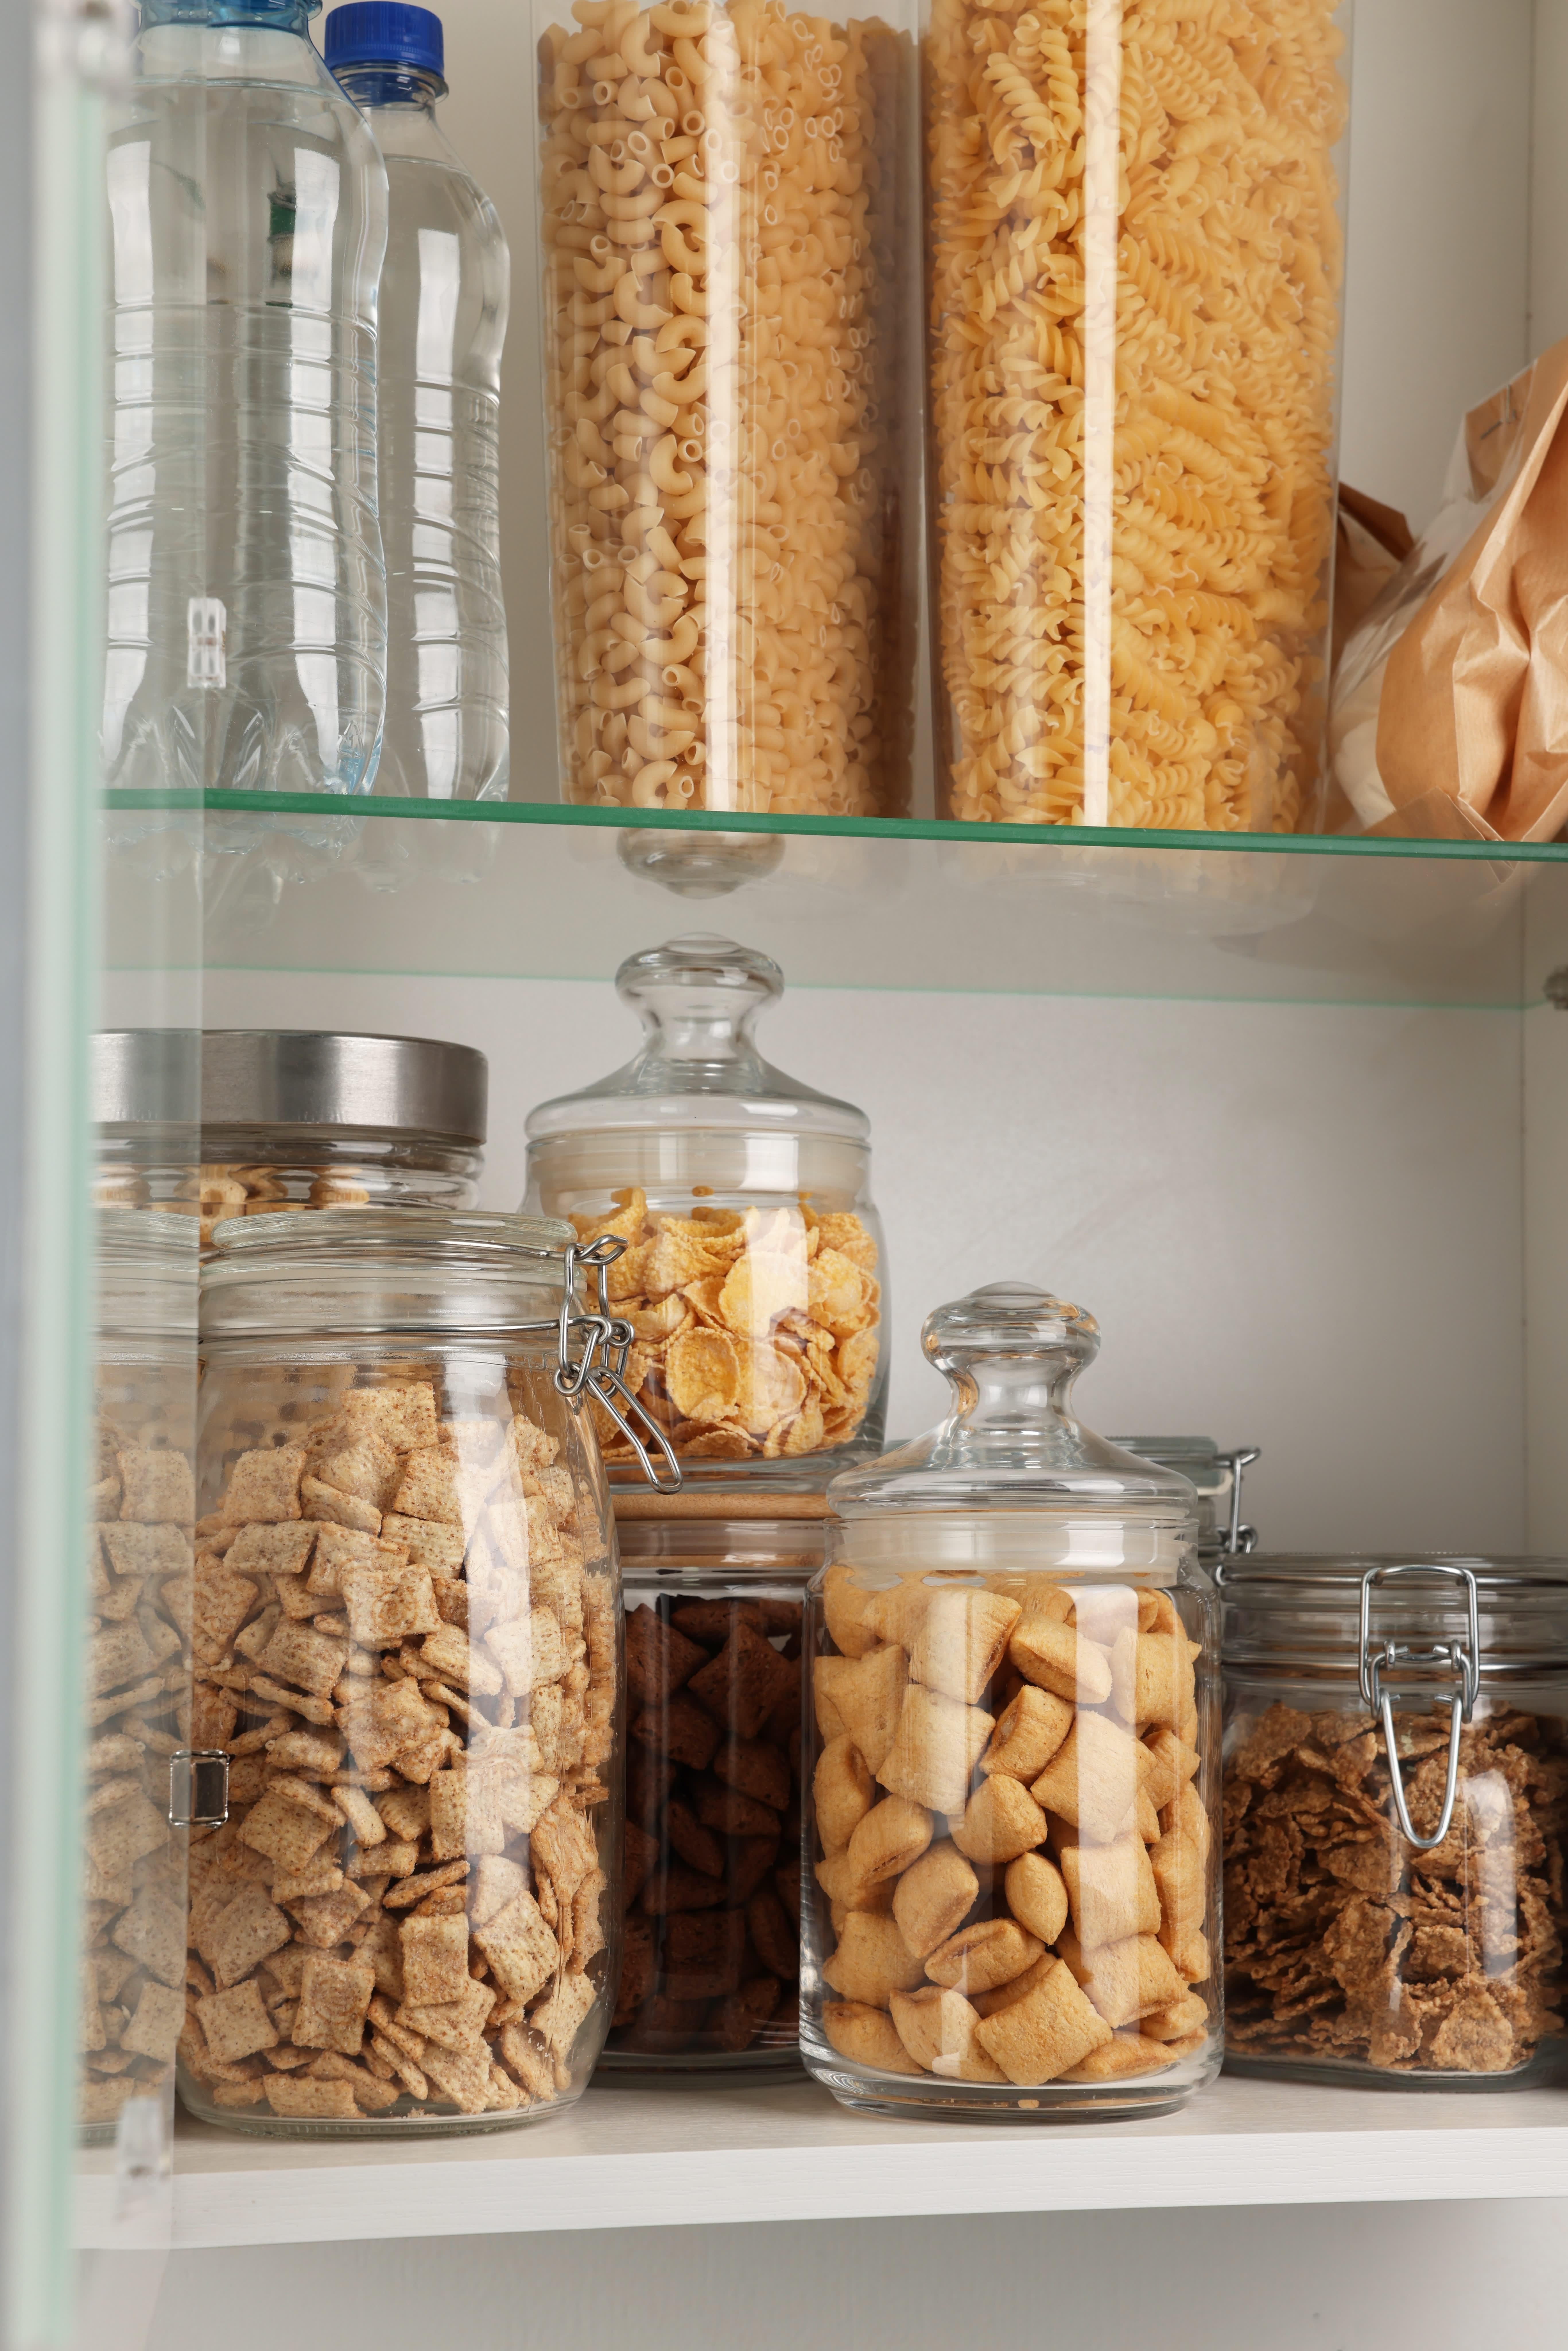 Should You Really Decant Fridge Ingredients Into Storage